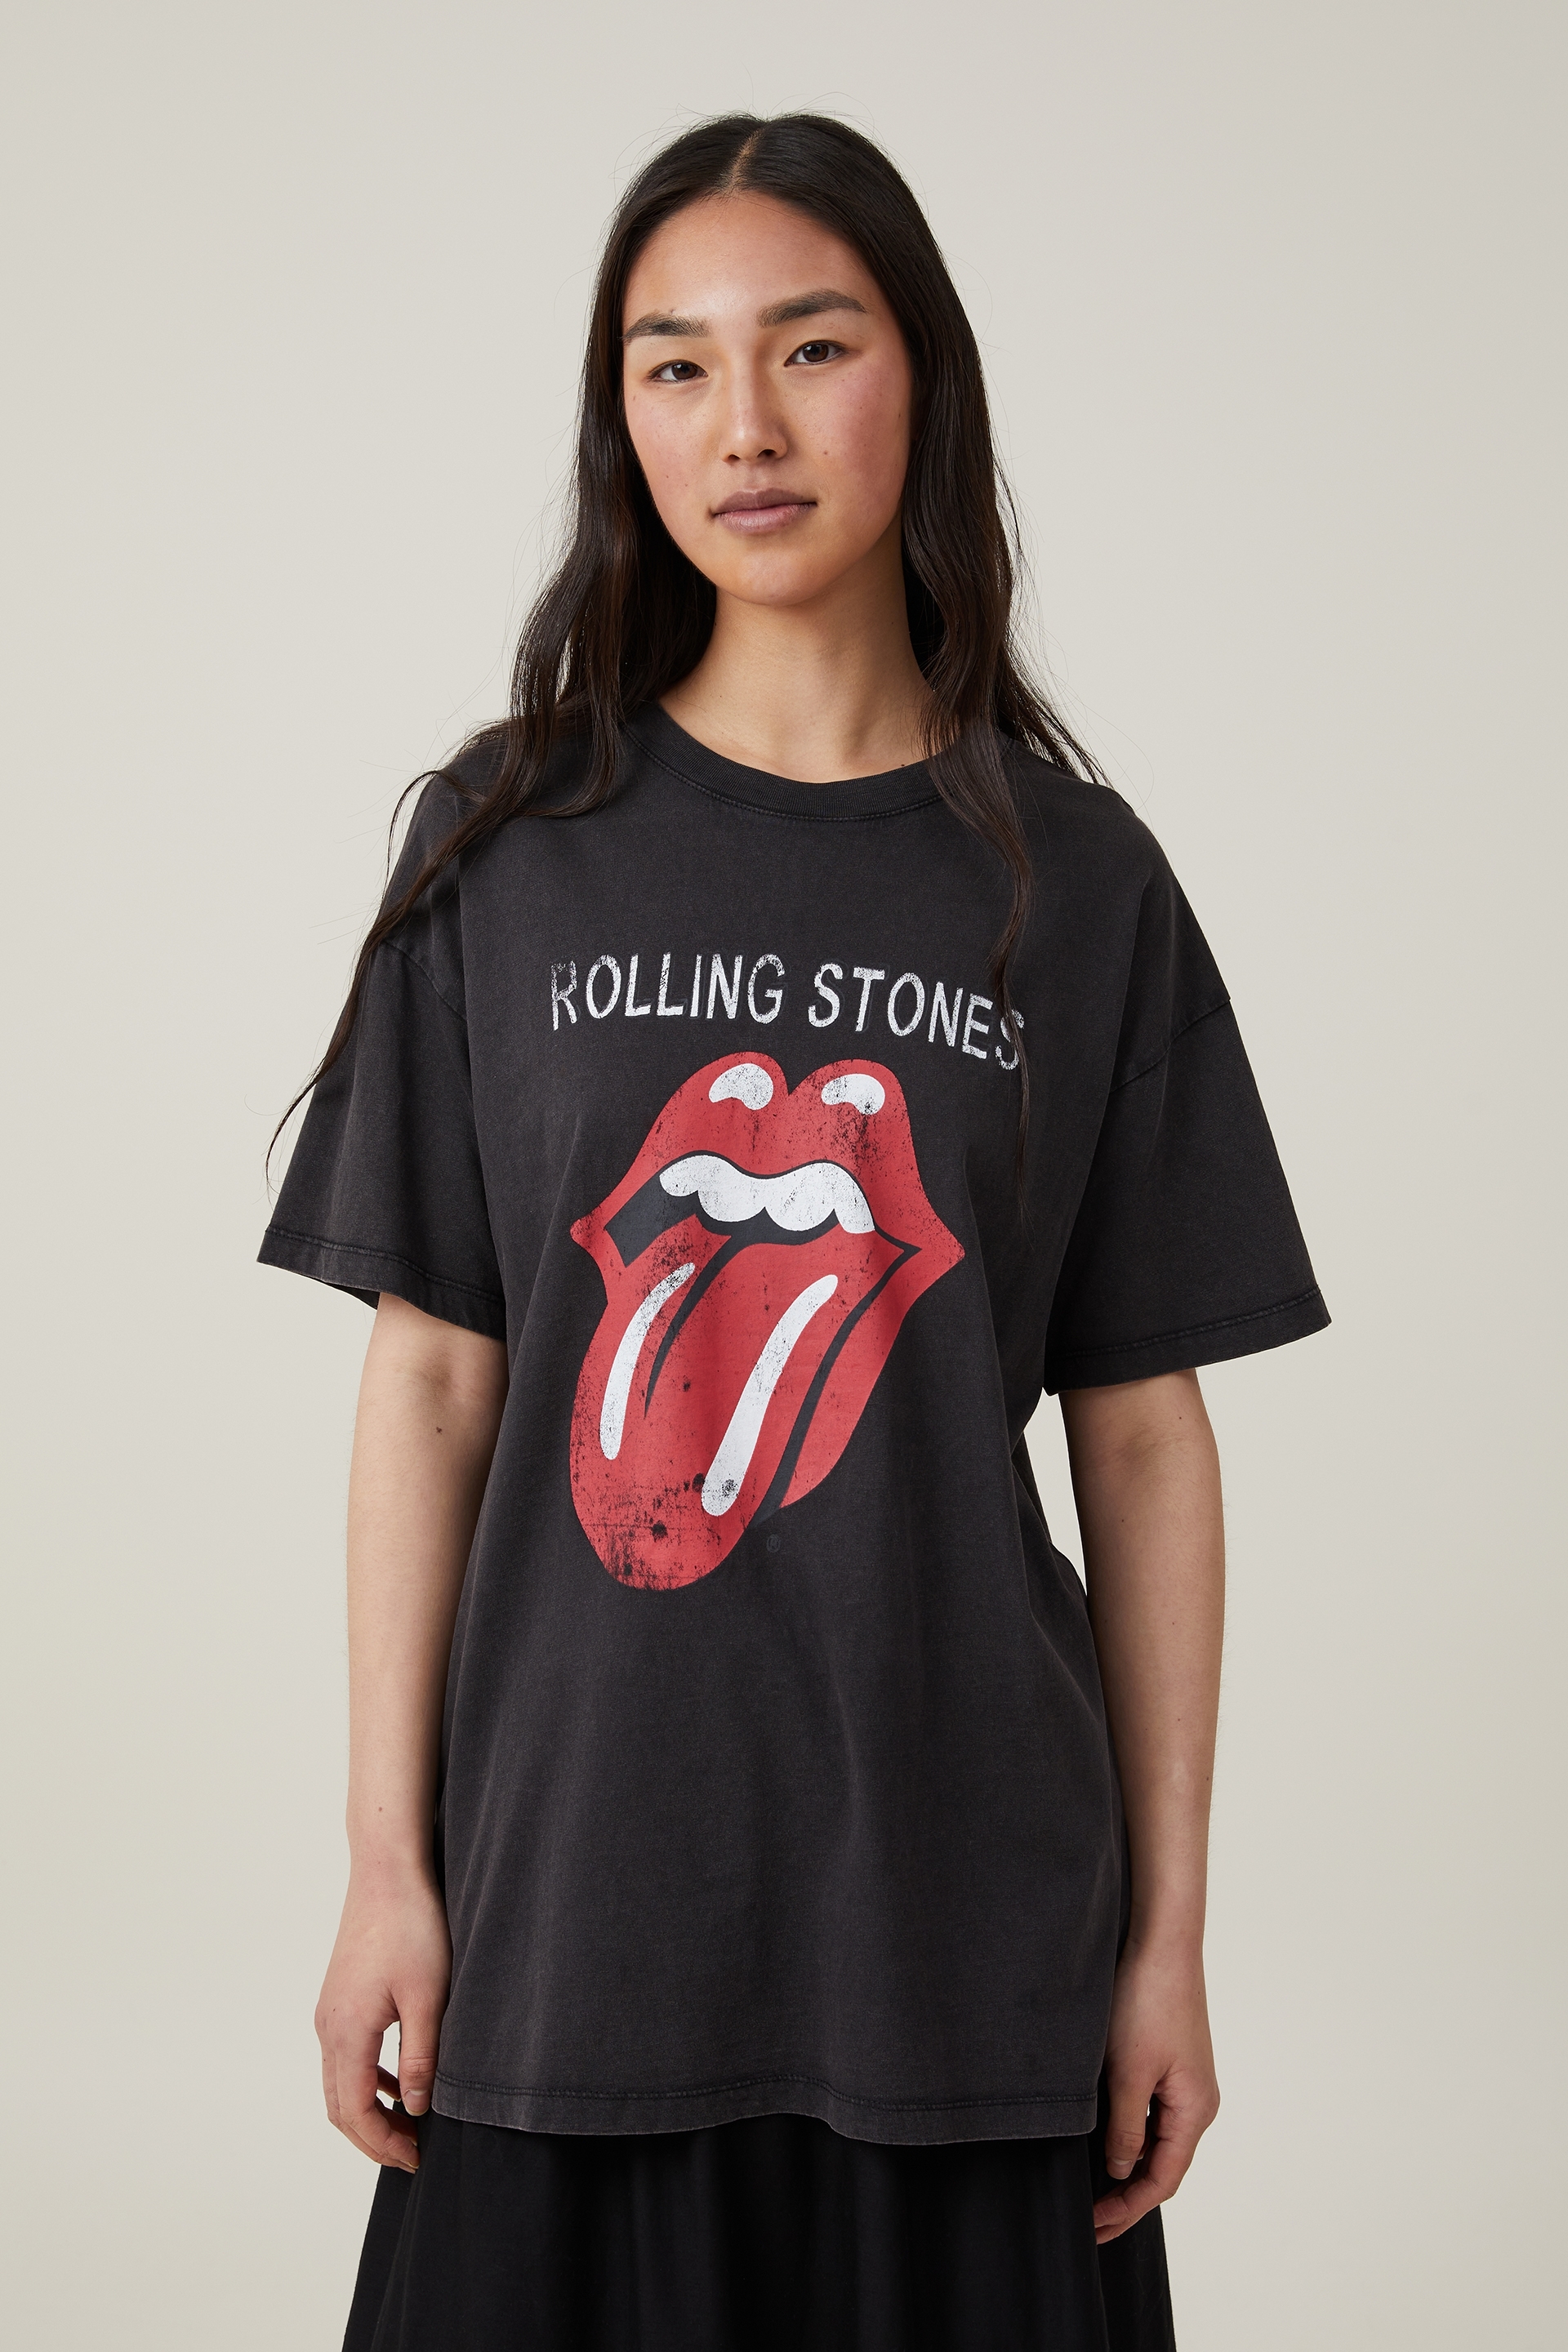 Cotton On Women - Oversized Rolling Stones Music Tee - Lcn br the rolling stones tongue/black